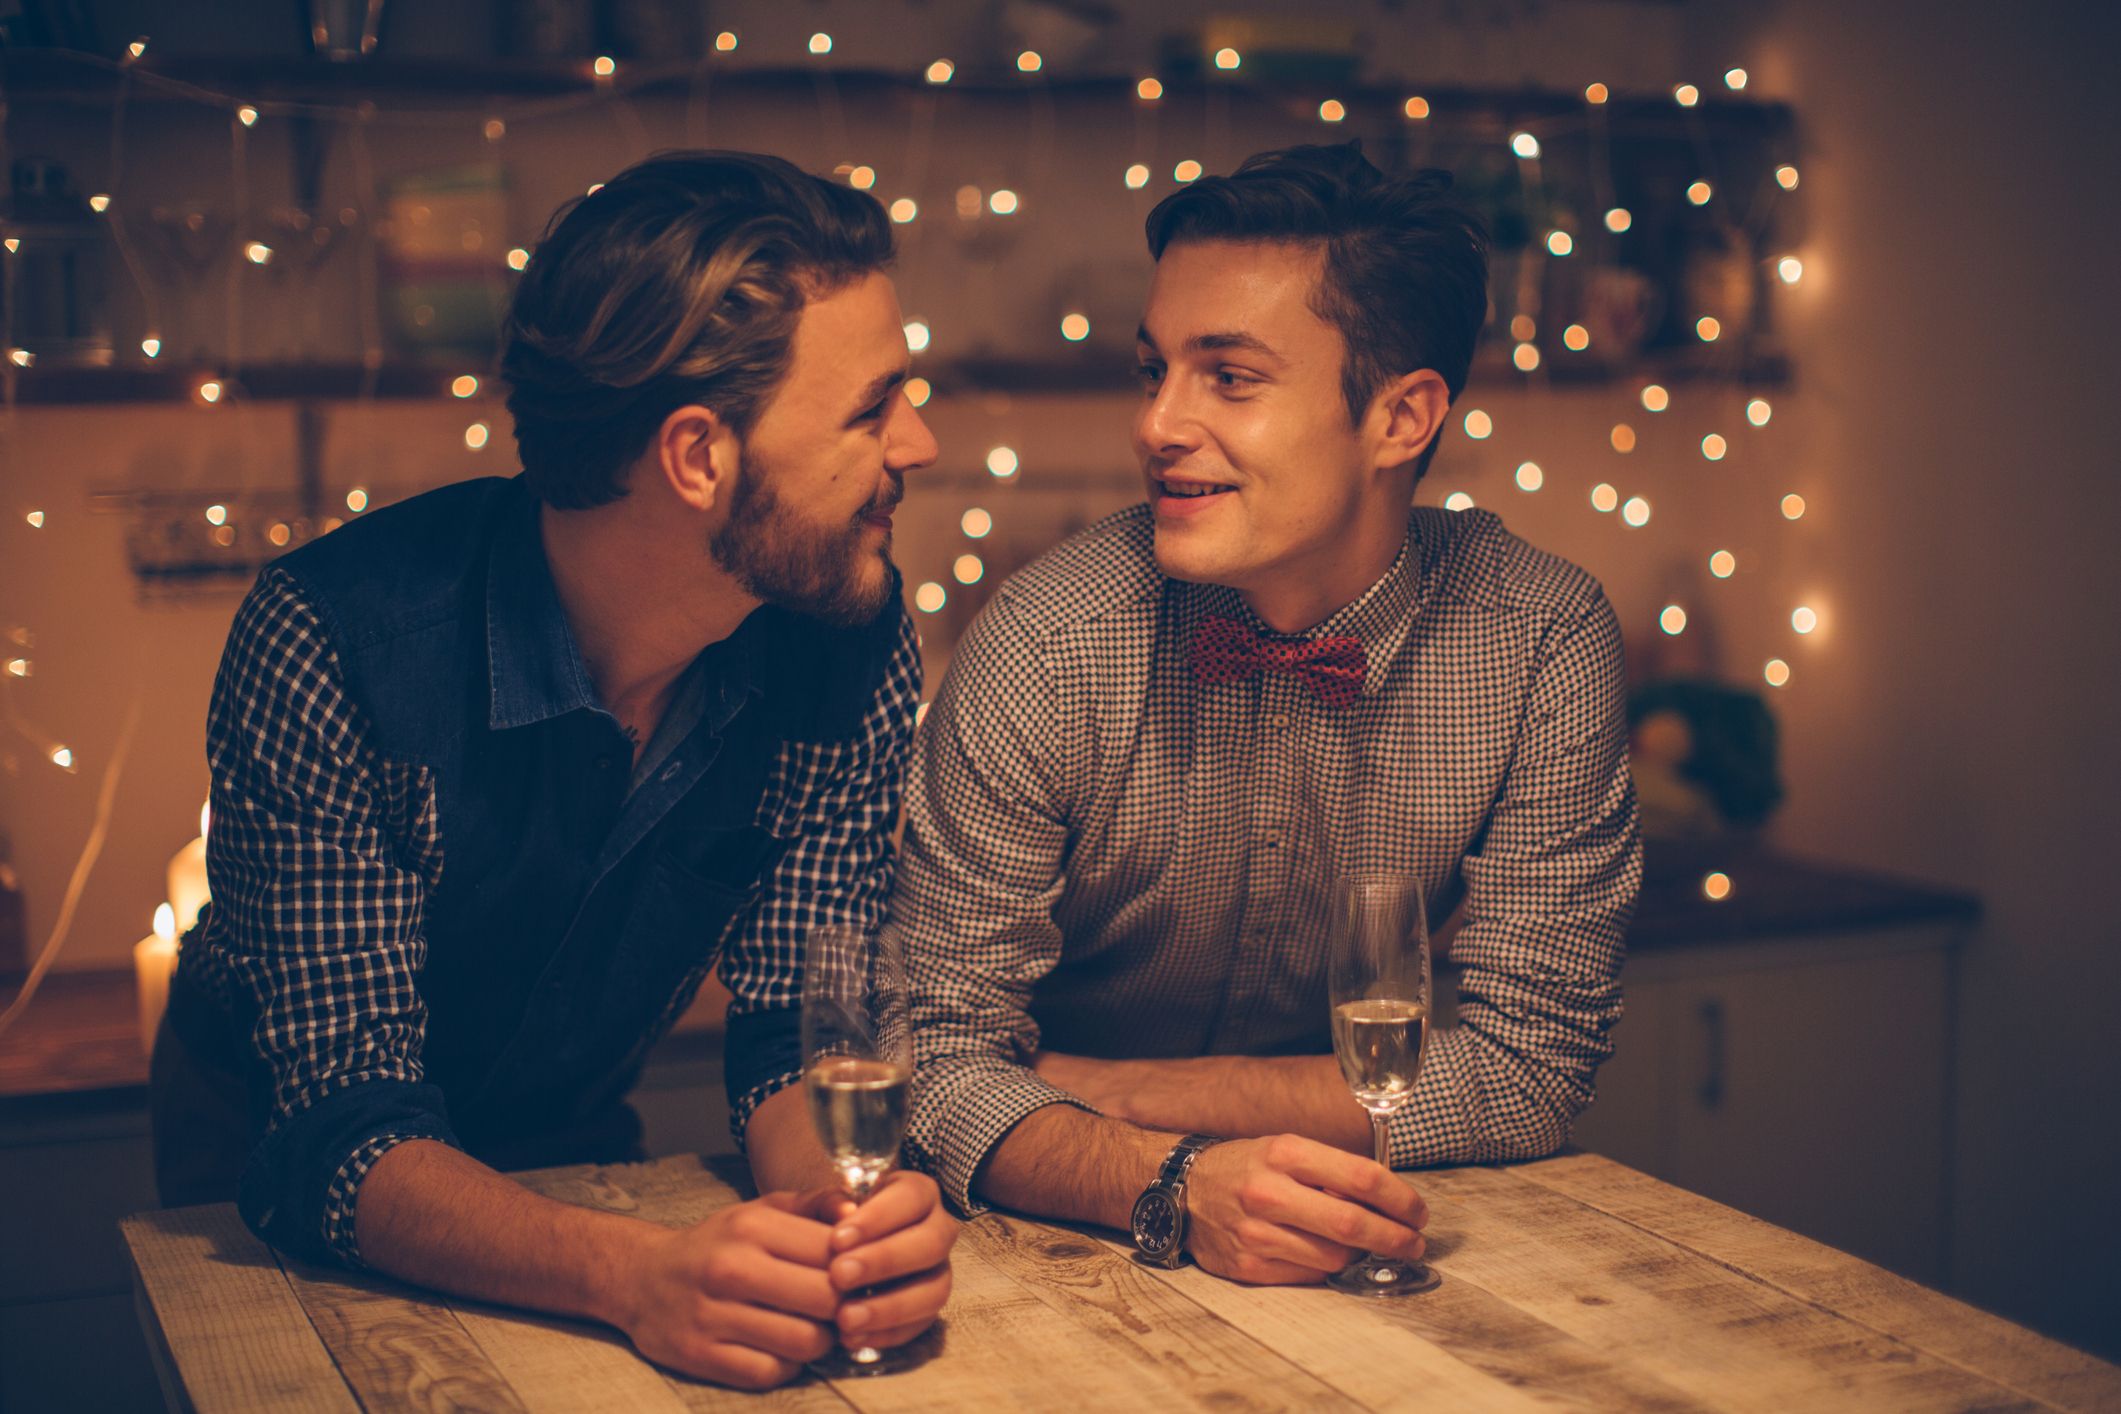 14 Fun Date Night Ideas To Try At Home - Date Night Ideas